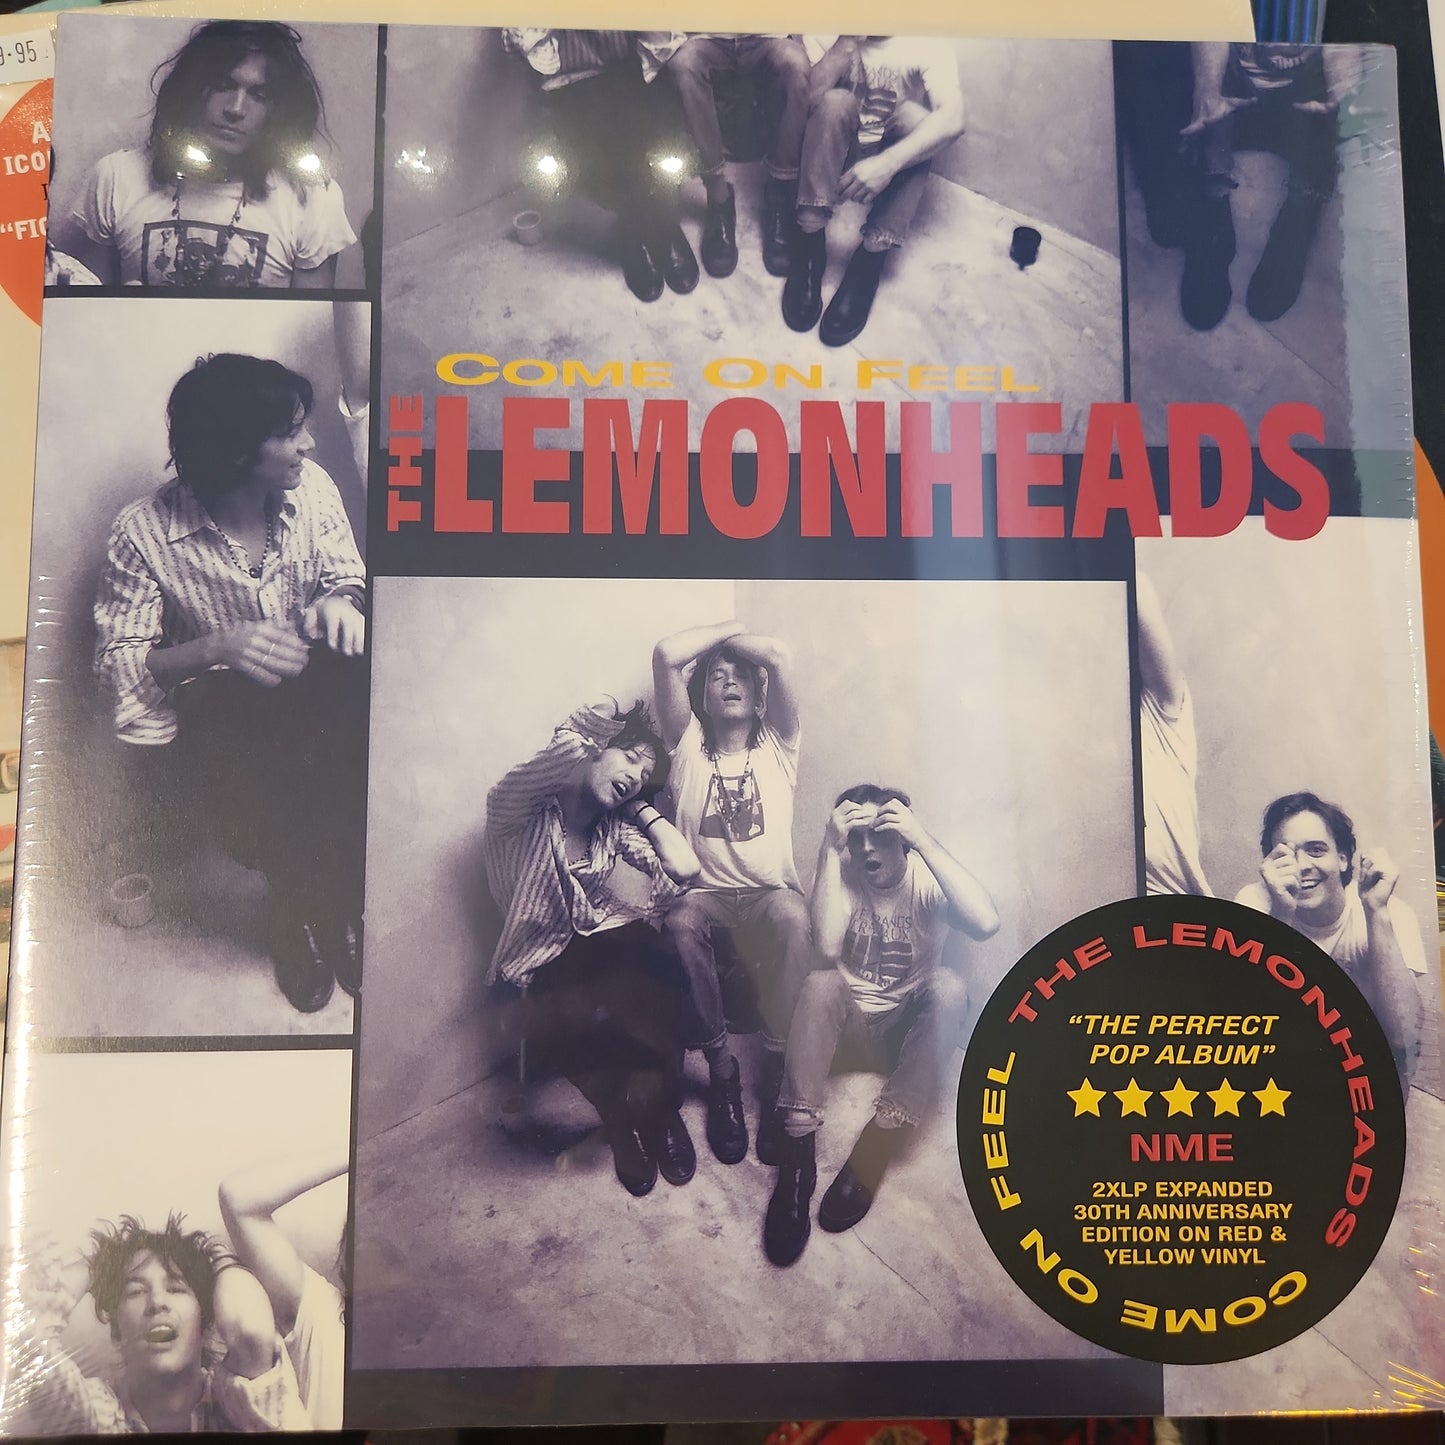 The Lemonheads - Come on Feel - 30th Anniversary Limited Colour Vinyl LP